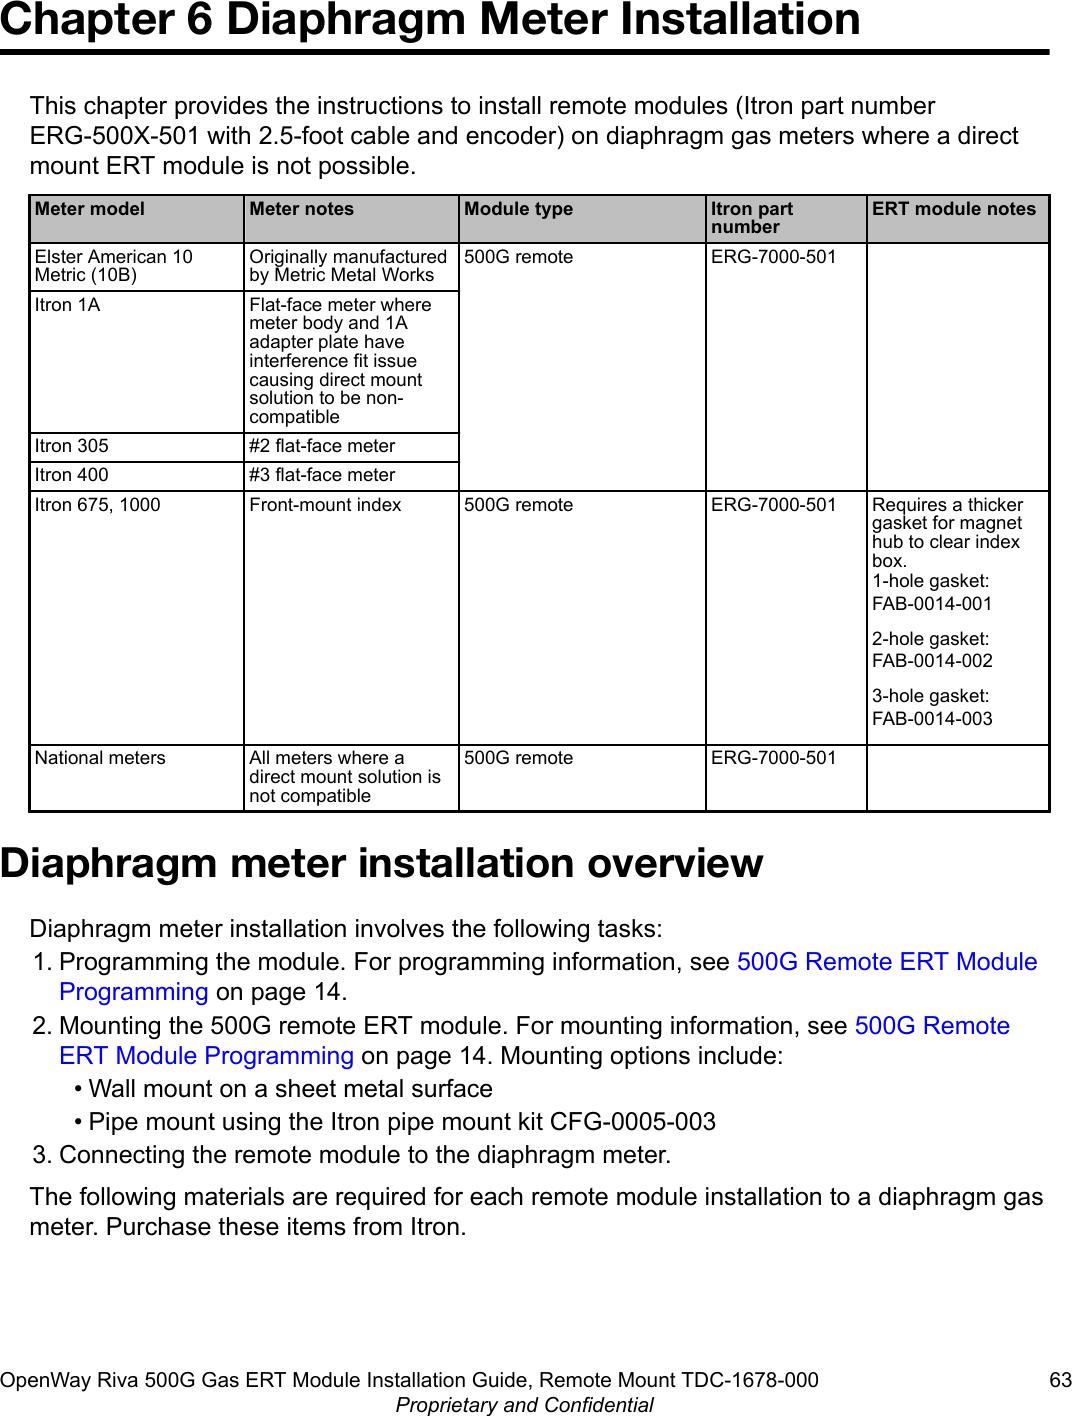 Chapter 6 Diaphragm Meter InstallationThis chapter provides the instructions to install remote modules (Itron part numberERG-500X-501 with 2.5-foot cable and encoder) on diaphragm gas meters where a directmount ERT module is not possible.Meter model Meter notes Module type Itron partnumberERT module notesElster American 10Metric (10B)Originally manufacturedby Metric Metal Works500G remote ERG-7000-501Itron 1A Flat-face meter wheremeter body and 1Aadapter plate haveinterference fit issuecausing direct mountsolution to be non-compatibleItron 305 #2 flat-face meterItron 400 #3 flat-face meterItron 675, 1000 Front-mount index 500G remote ERG-7000-501 Requires a thickergasket for magnethub to clear indexbox.1-hole gasket:FAB-0014-0012-hole gasket:FAB-0014-0023-hole gasket:FAB-0014-003National meters All meters where adirect mount solution isnot compatible500G remote ERG-7000-501Diaphragm meter installation overviewDiaphragm meter installation involves the following tasks:1. Programming the module. For programming information, see 500G Remote ERT ModuleProgramming on page 14.2. Mounting the 500G remote ERT module. For mounting information, see 500G RemoteERT Module Programming on page 14. Mounting options include:• Wall mount on a sheet metal surface• Pipe mount using the Itron pipe mount kit CFG-0005-0033. Connecting the remote module to the diaphragm meter.The following materials are required for each remote module installation to a diaphragm gasmeter. Purchase these items from Itron.OpenWay Riva 500G Gas ERT Module Installation Guide, Remote Mount TDC-1678-000 63Proprietary and Confidential